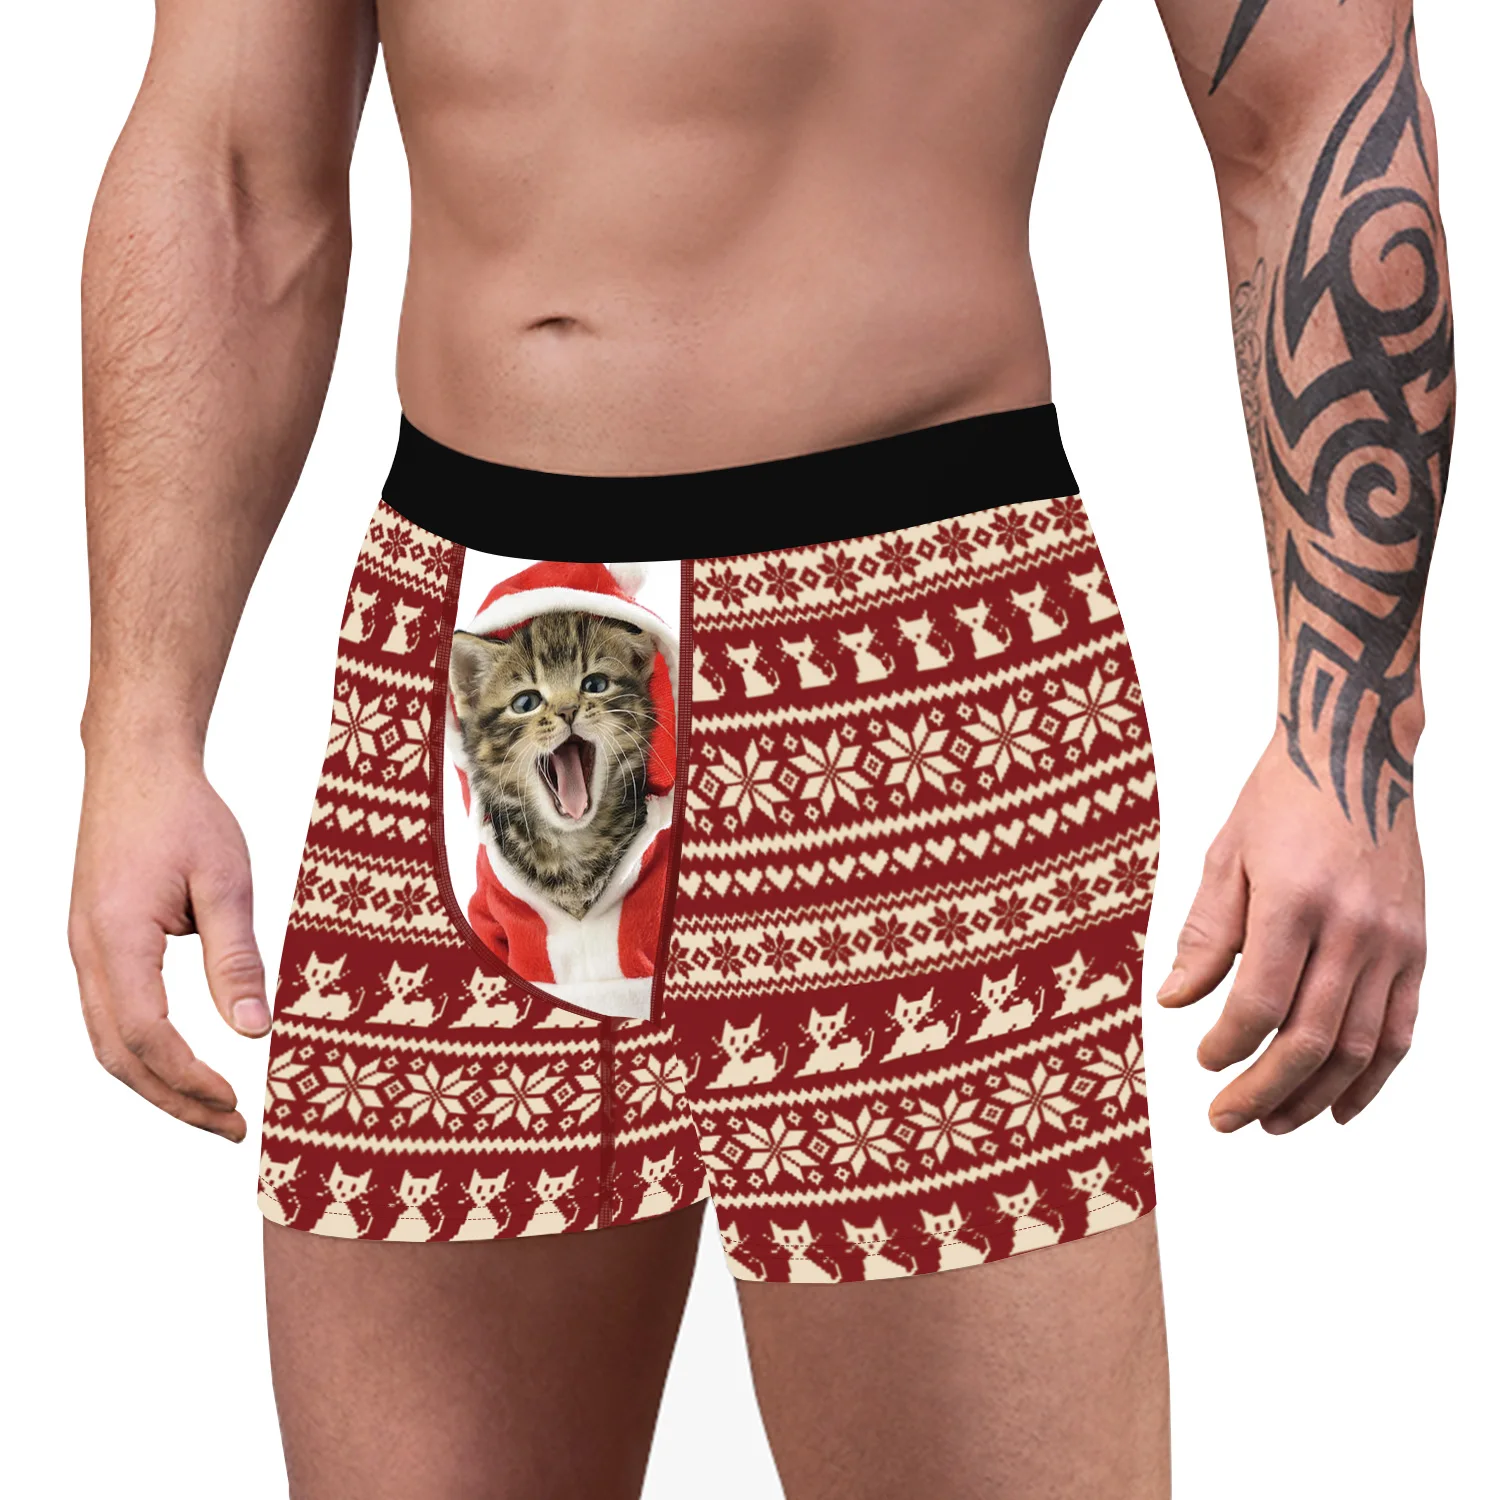 Buy SSSB Men's Toy Story Christmas Sexy Seamless Stretchable Boxer